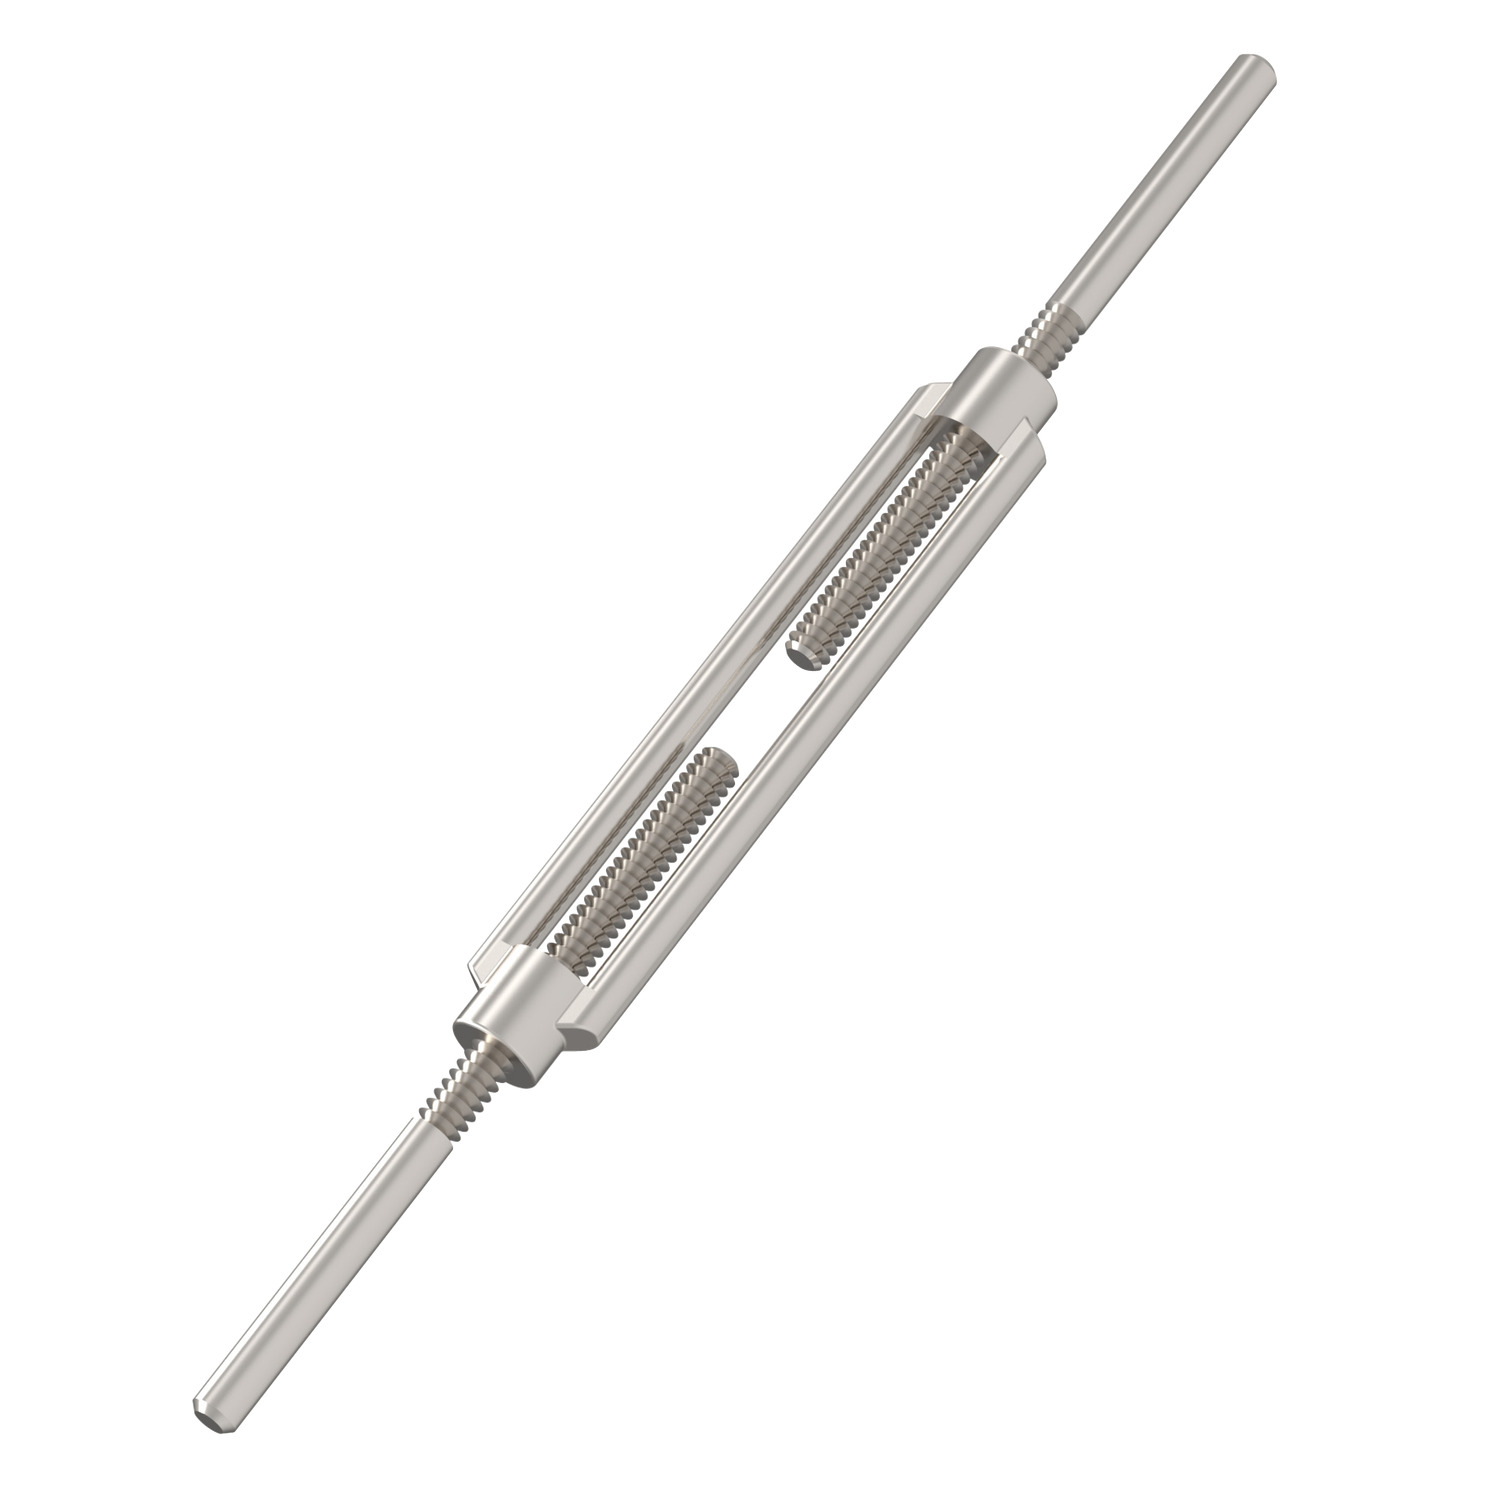 Product R3836, Stub End Turnbuckles stainless steel / 